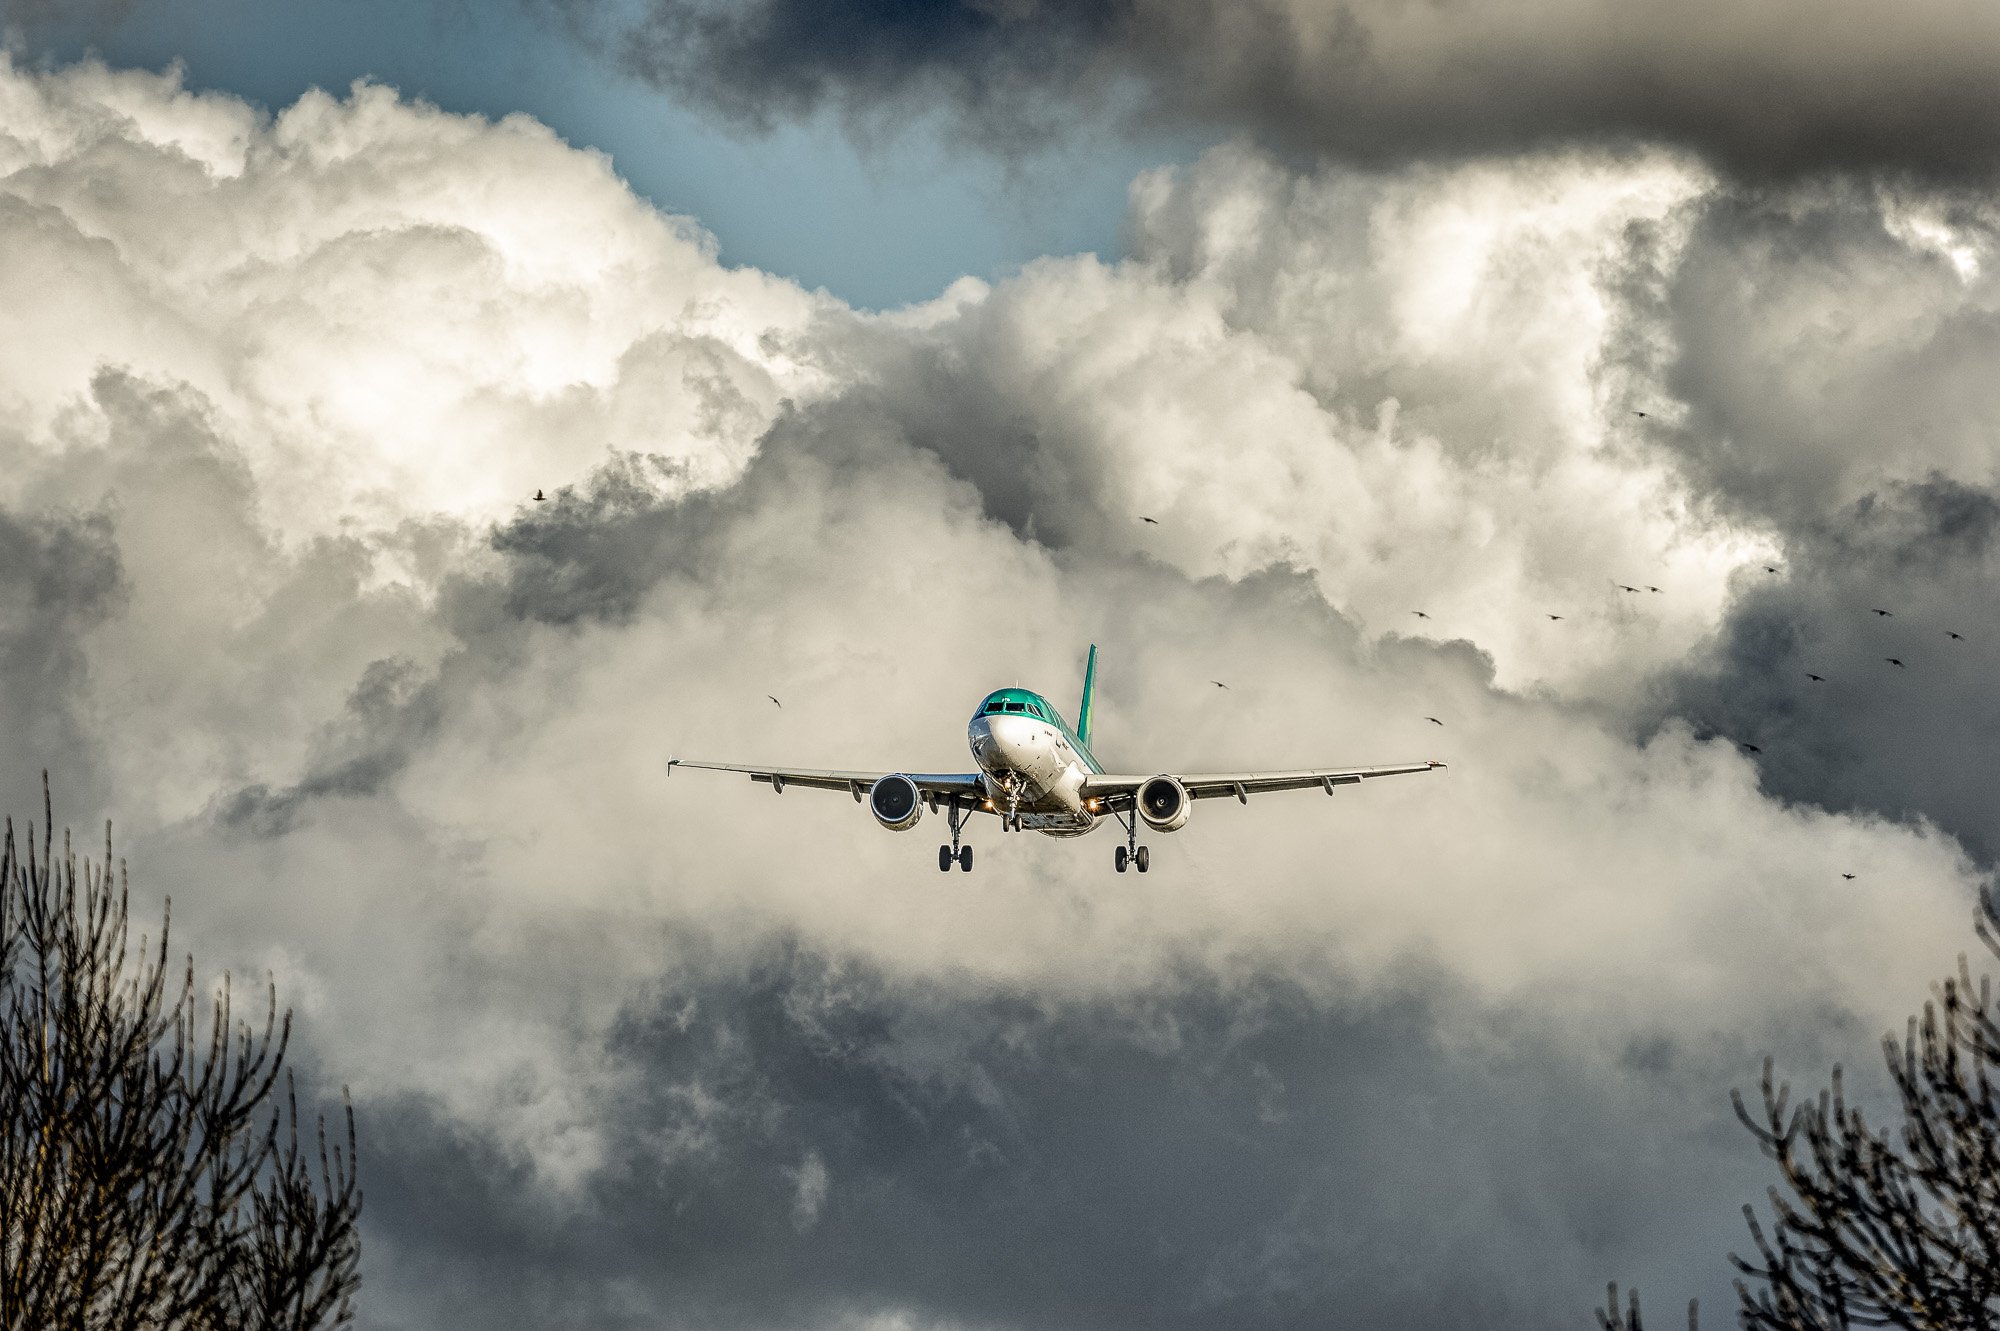 Aer Lingus (EI-EPT) on finals for 27L at LHR under a late winter sky